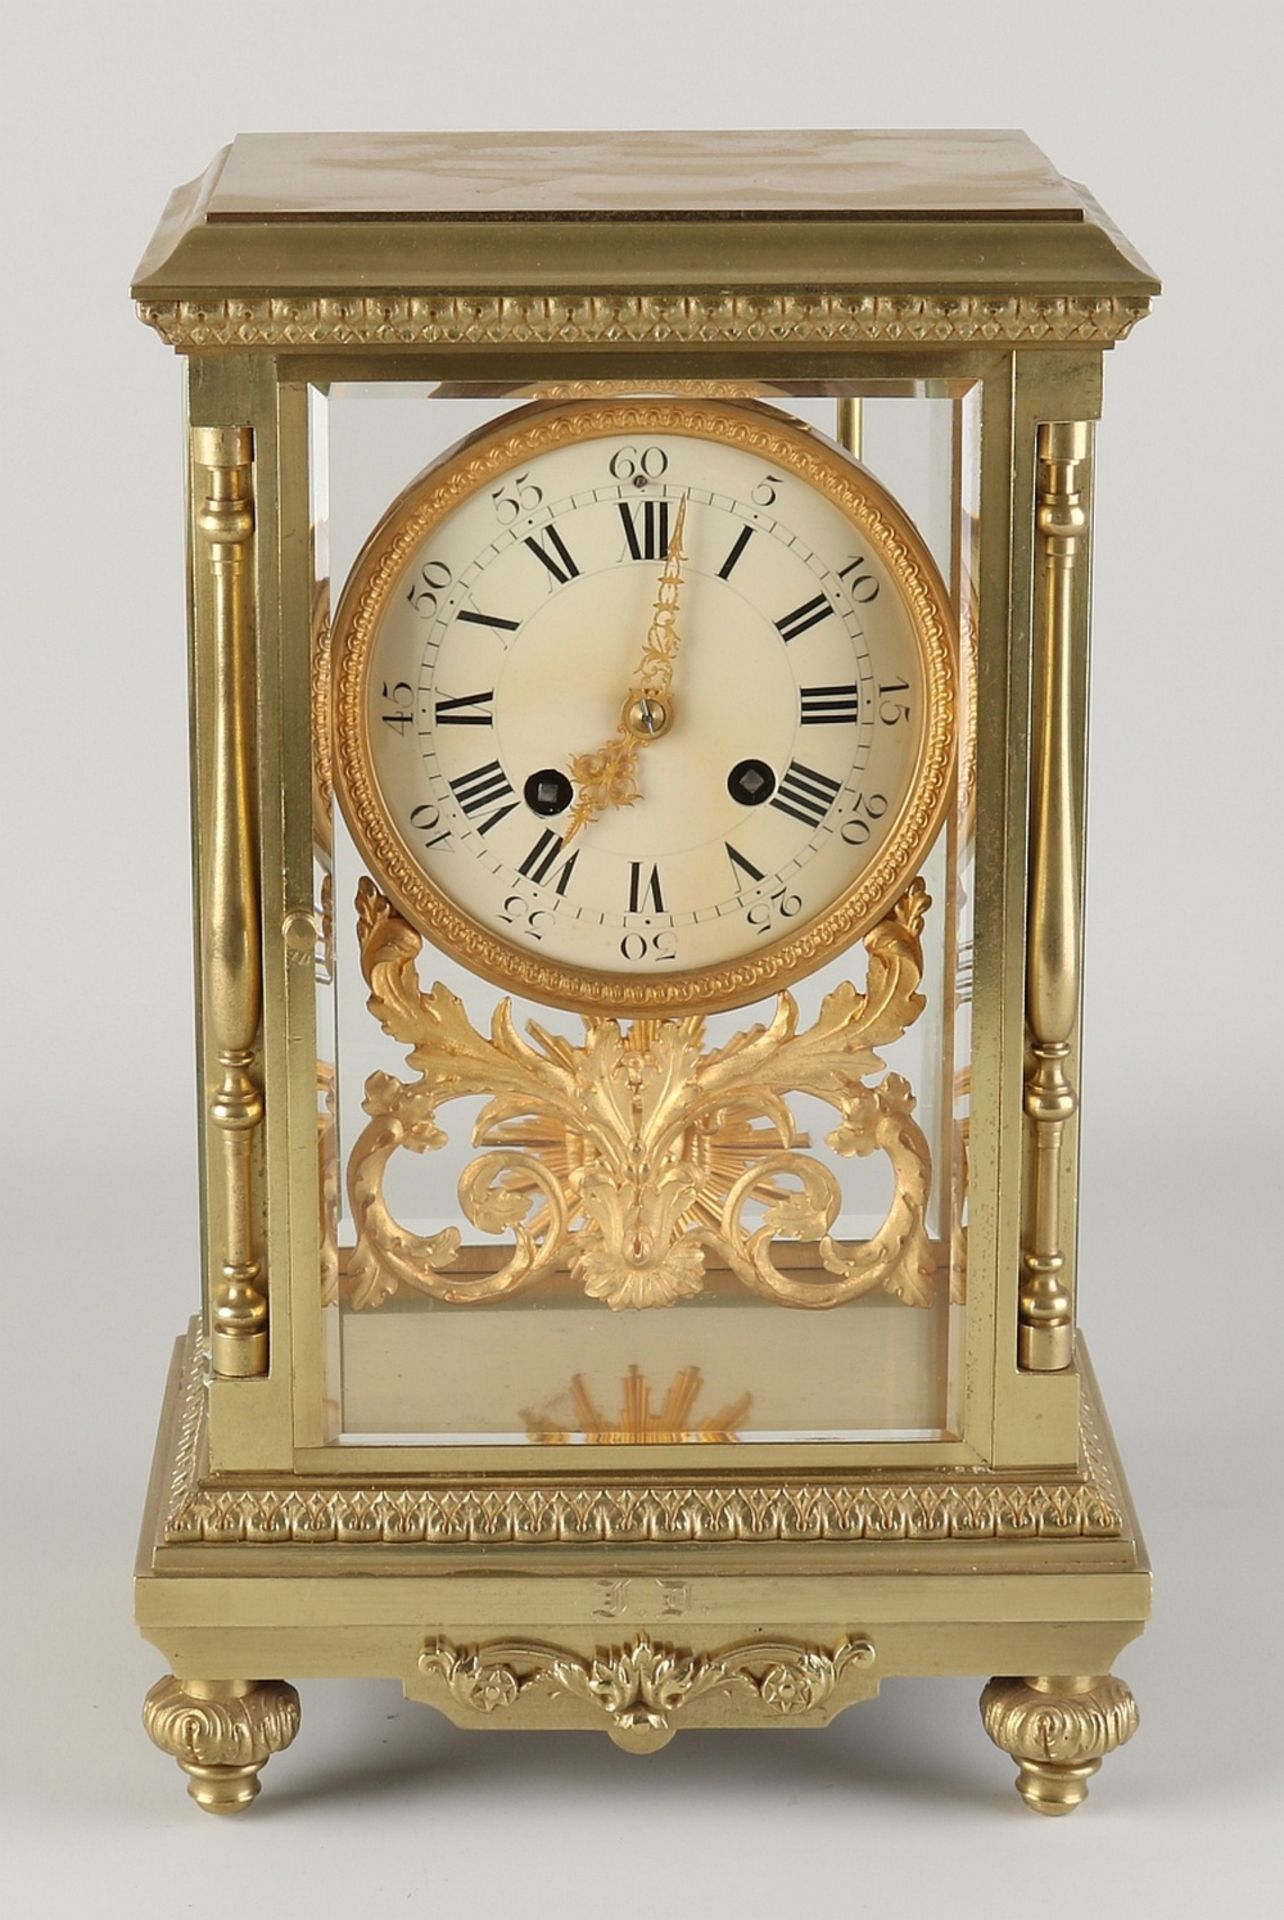 Antique French glass mantel clock